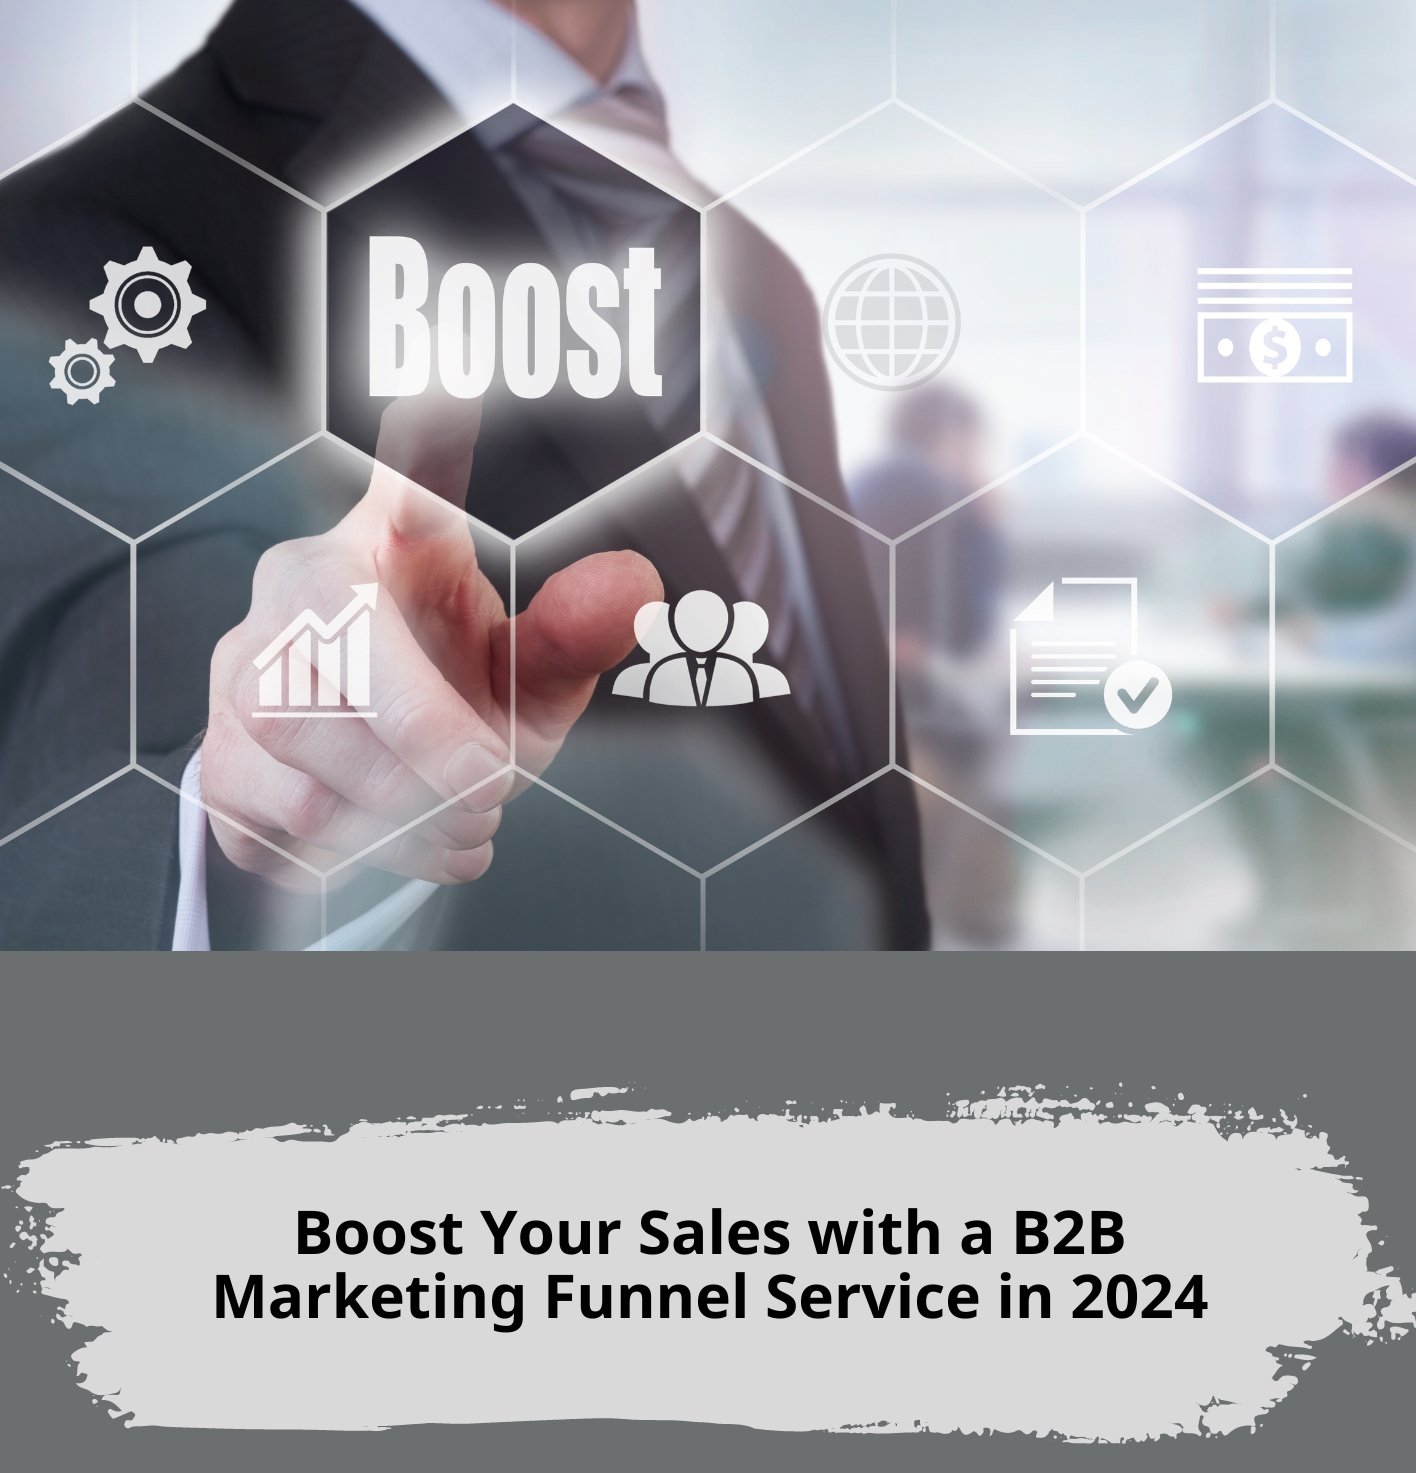 Boost Your Sales with a B2B Marketing Funnel Service in 2024